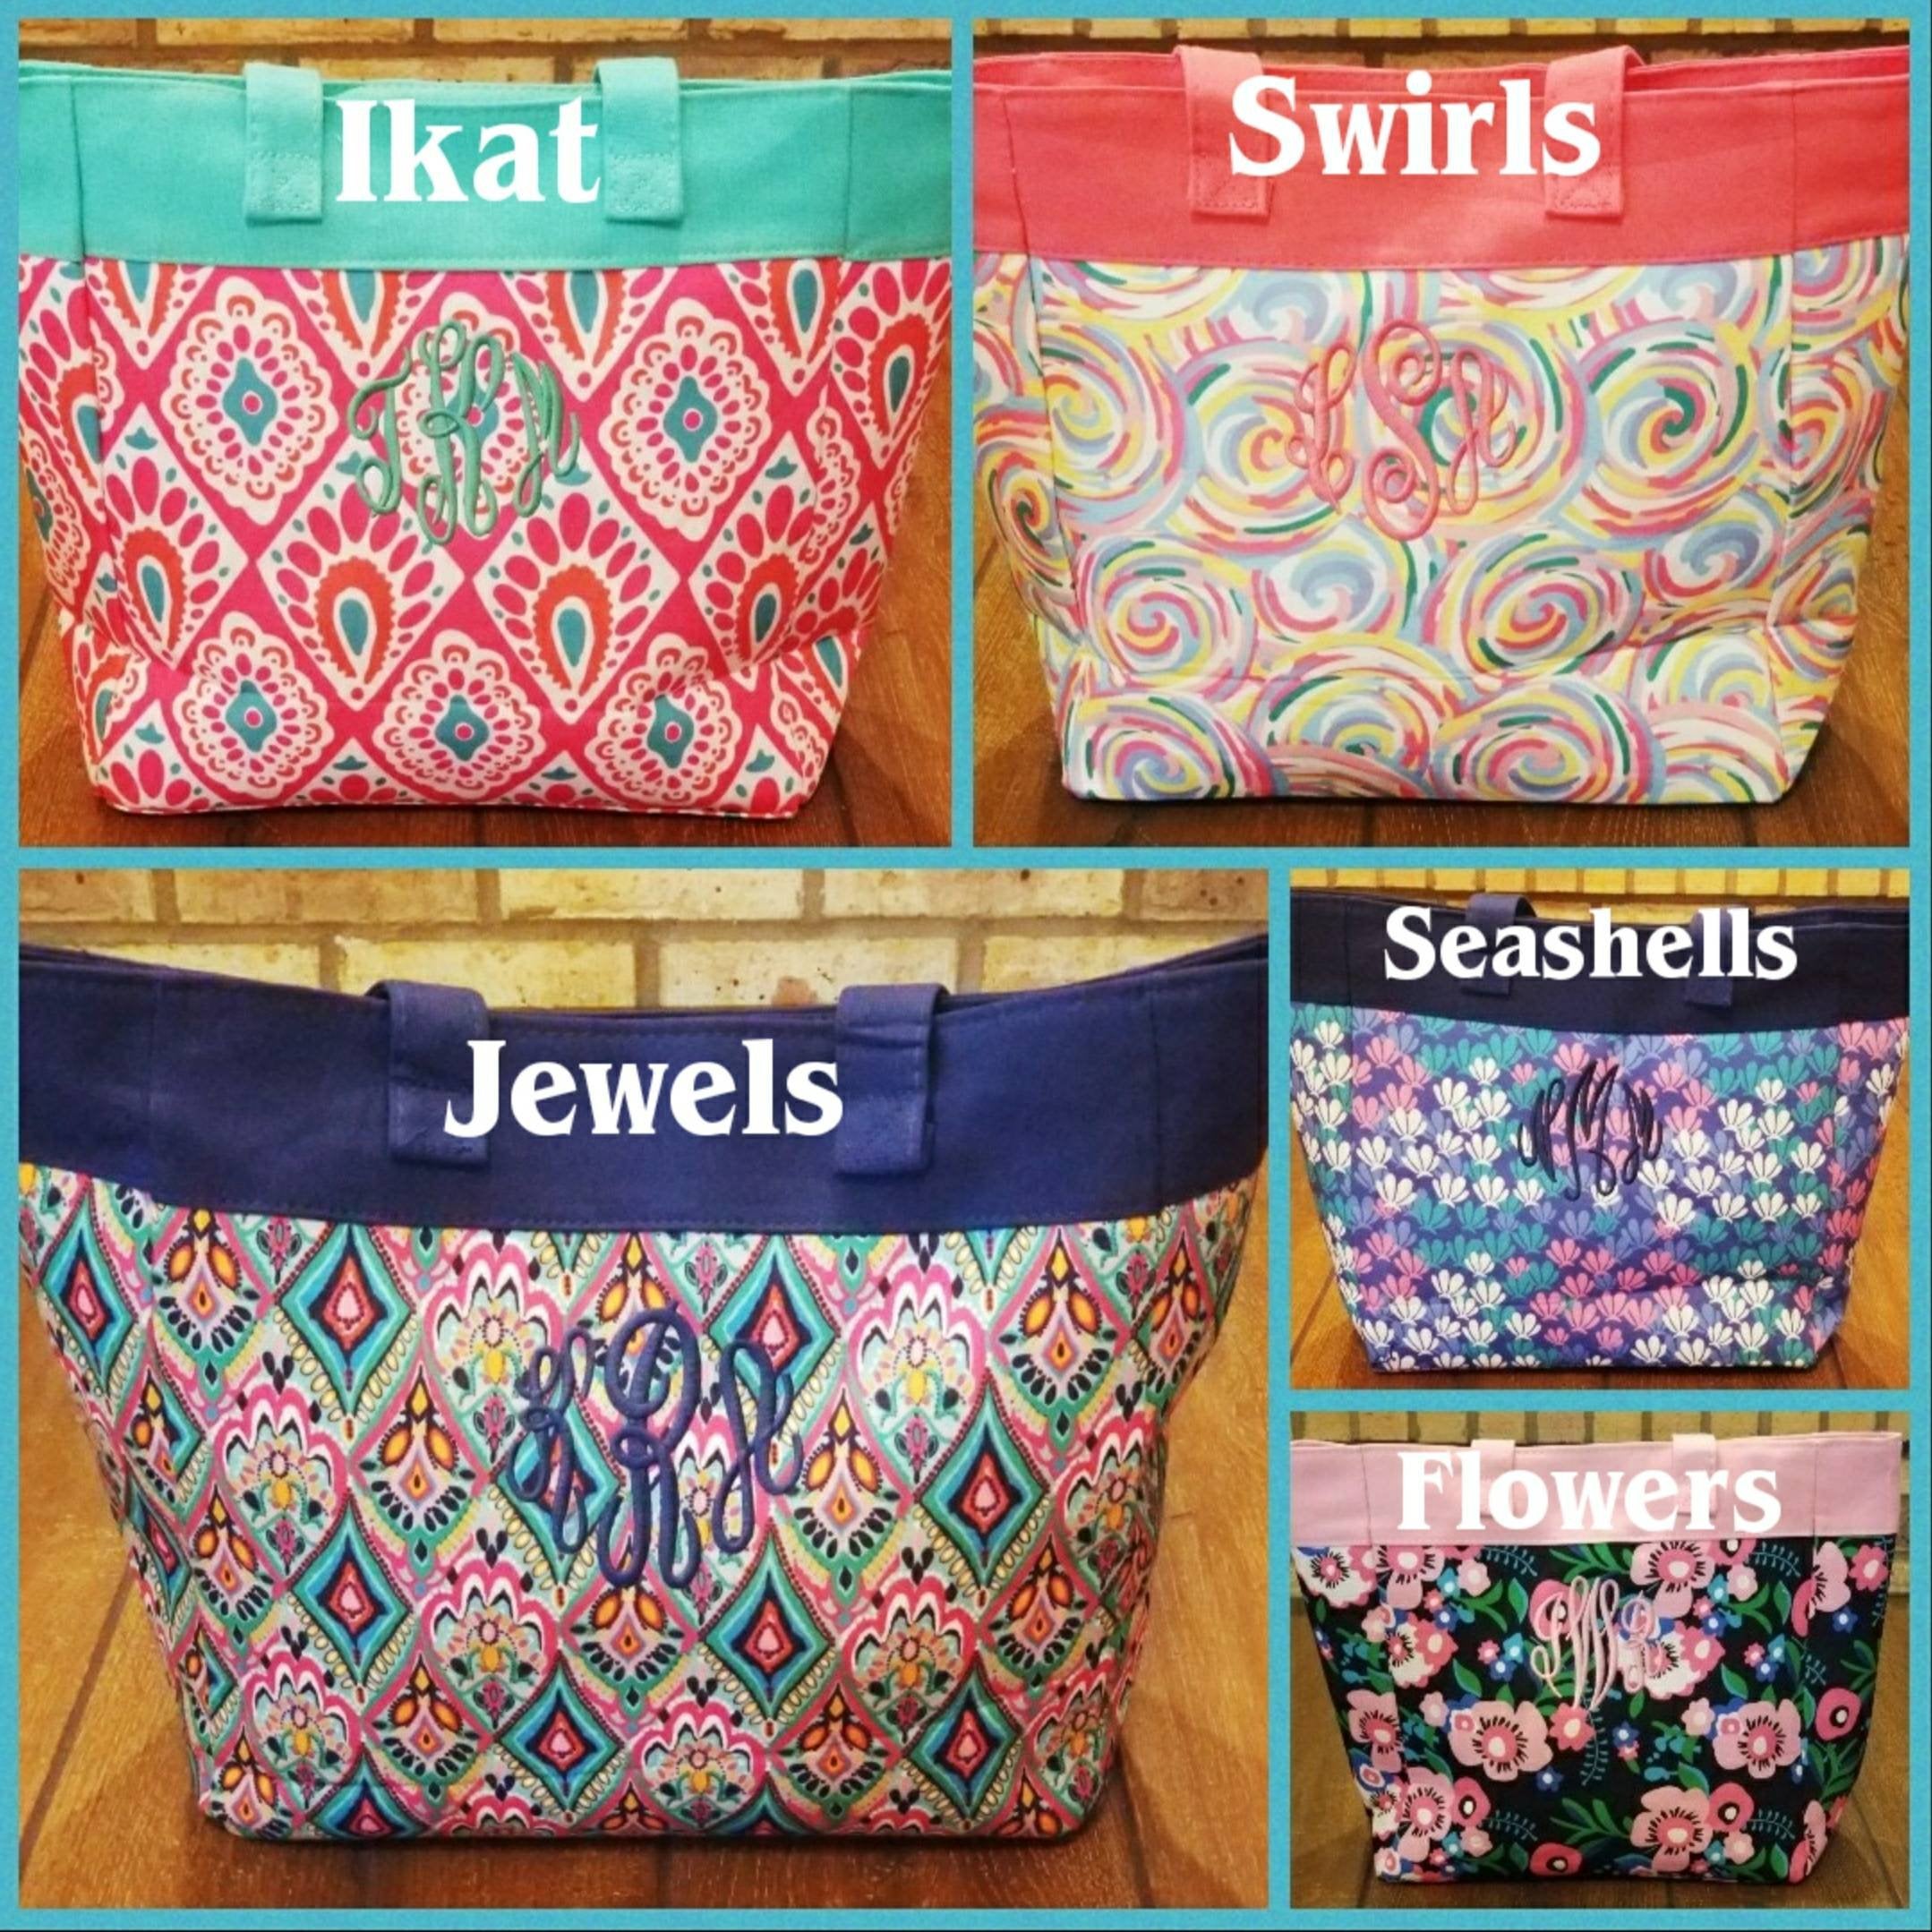 Monogrammed Beach Tote Bags- Embroidered Beachy Summer Vacation Totes, Personalized, Tropical, Swimming, Mothers Day, Purse, Pool, Carry Bag